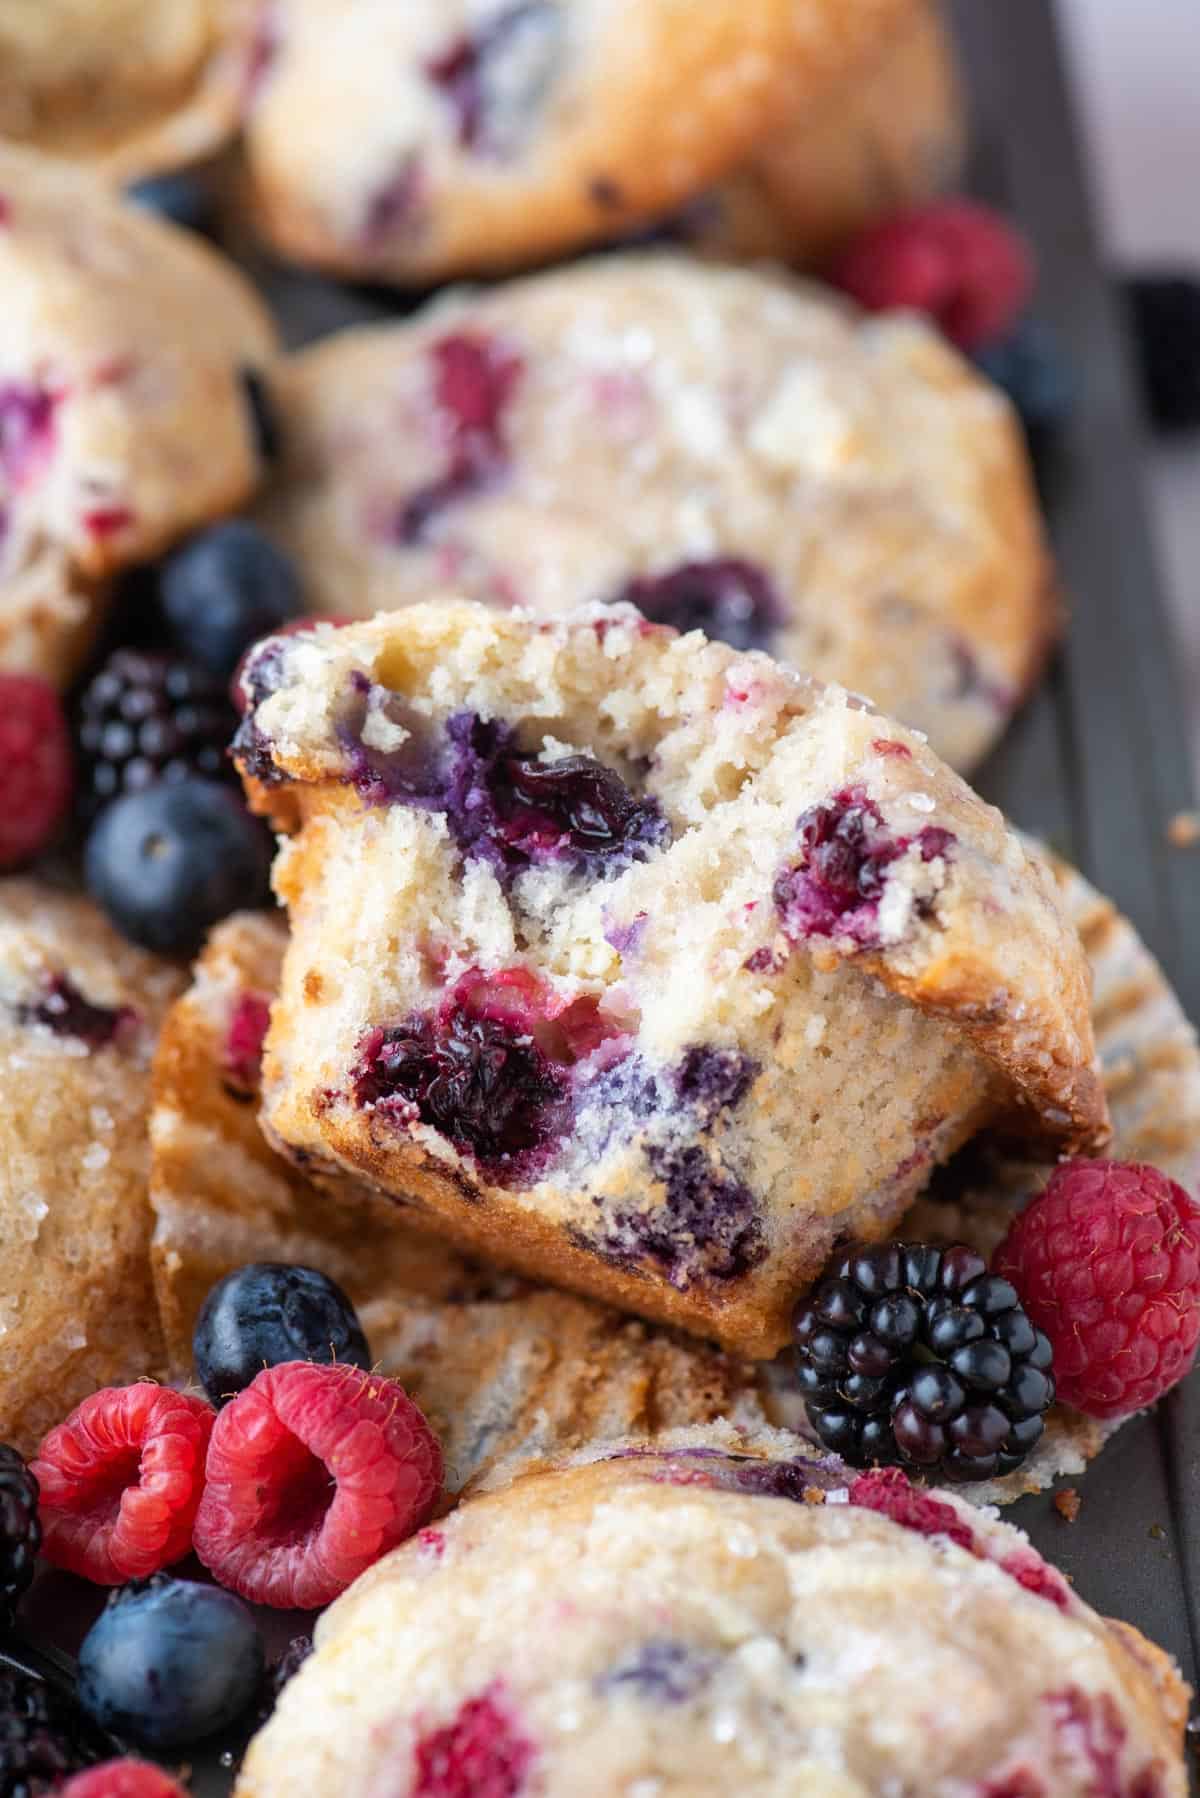 a triple berry cheesecake muffin missing one bite that exposes it's center, laying on its open muffin liner with raspberries, blackberries and blueberries around it, on top of a muffin pan full of more muffins